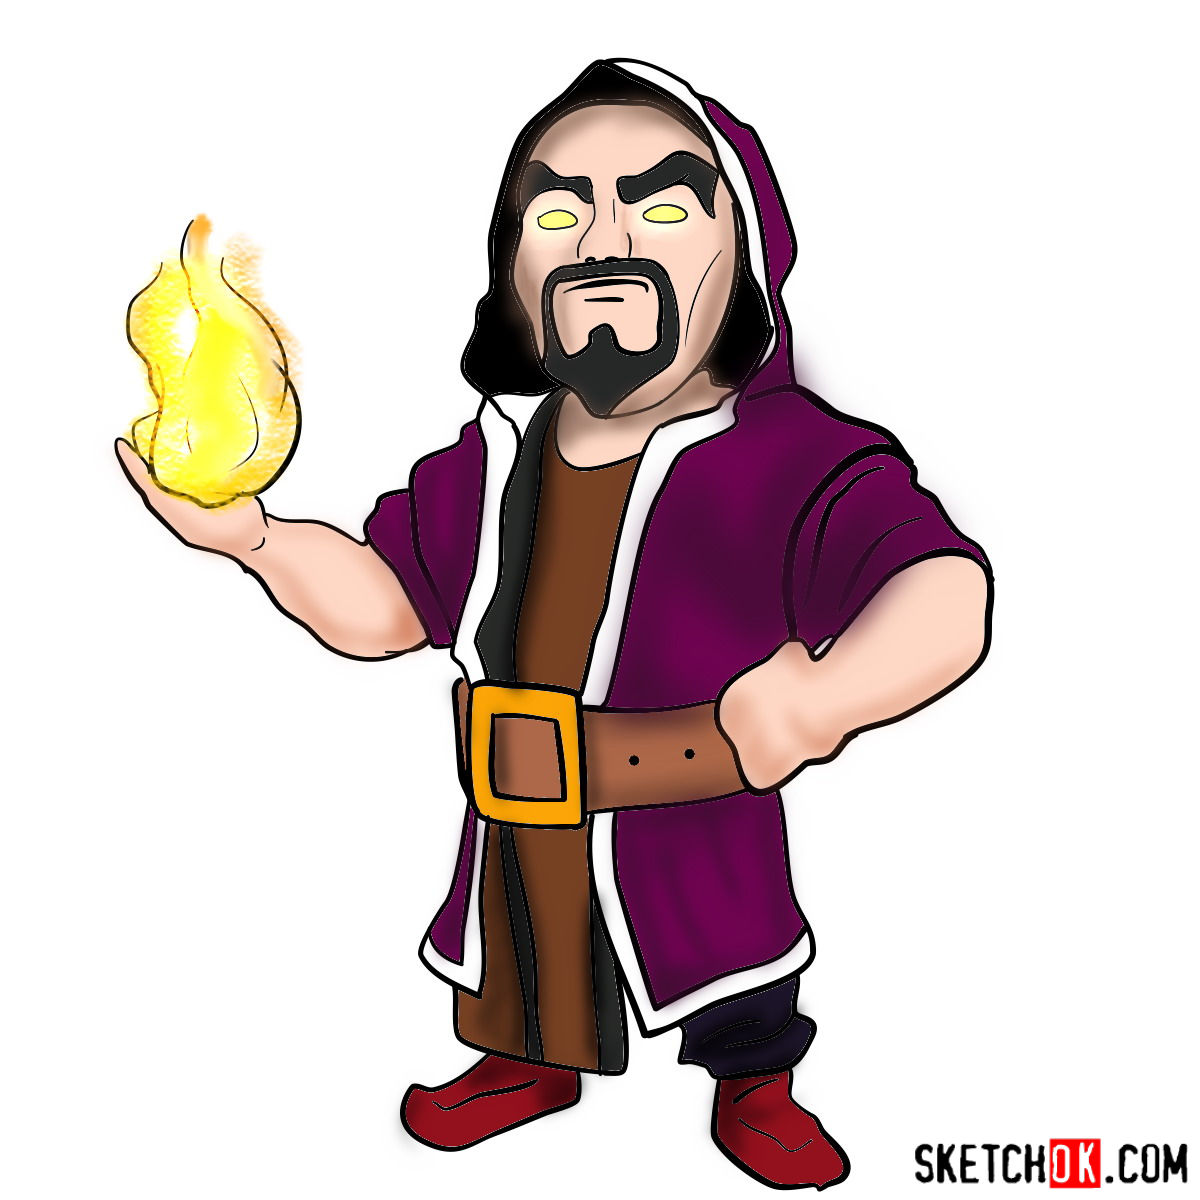 How to draw Wizard from Clash of Clans